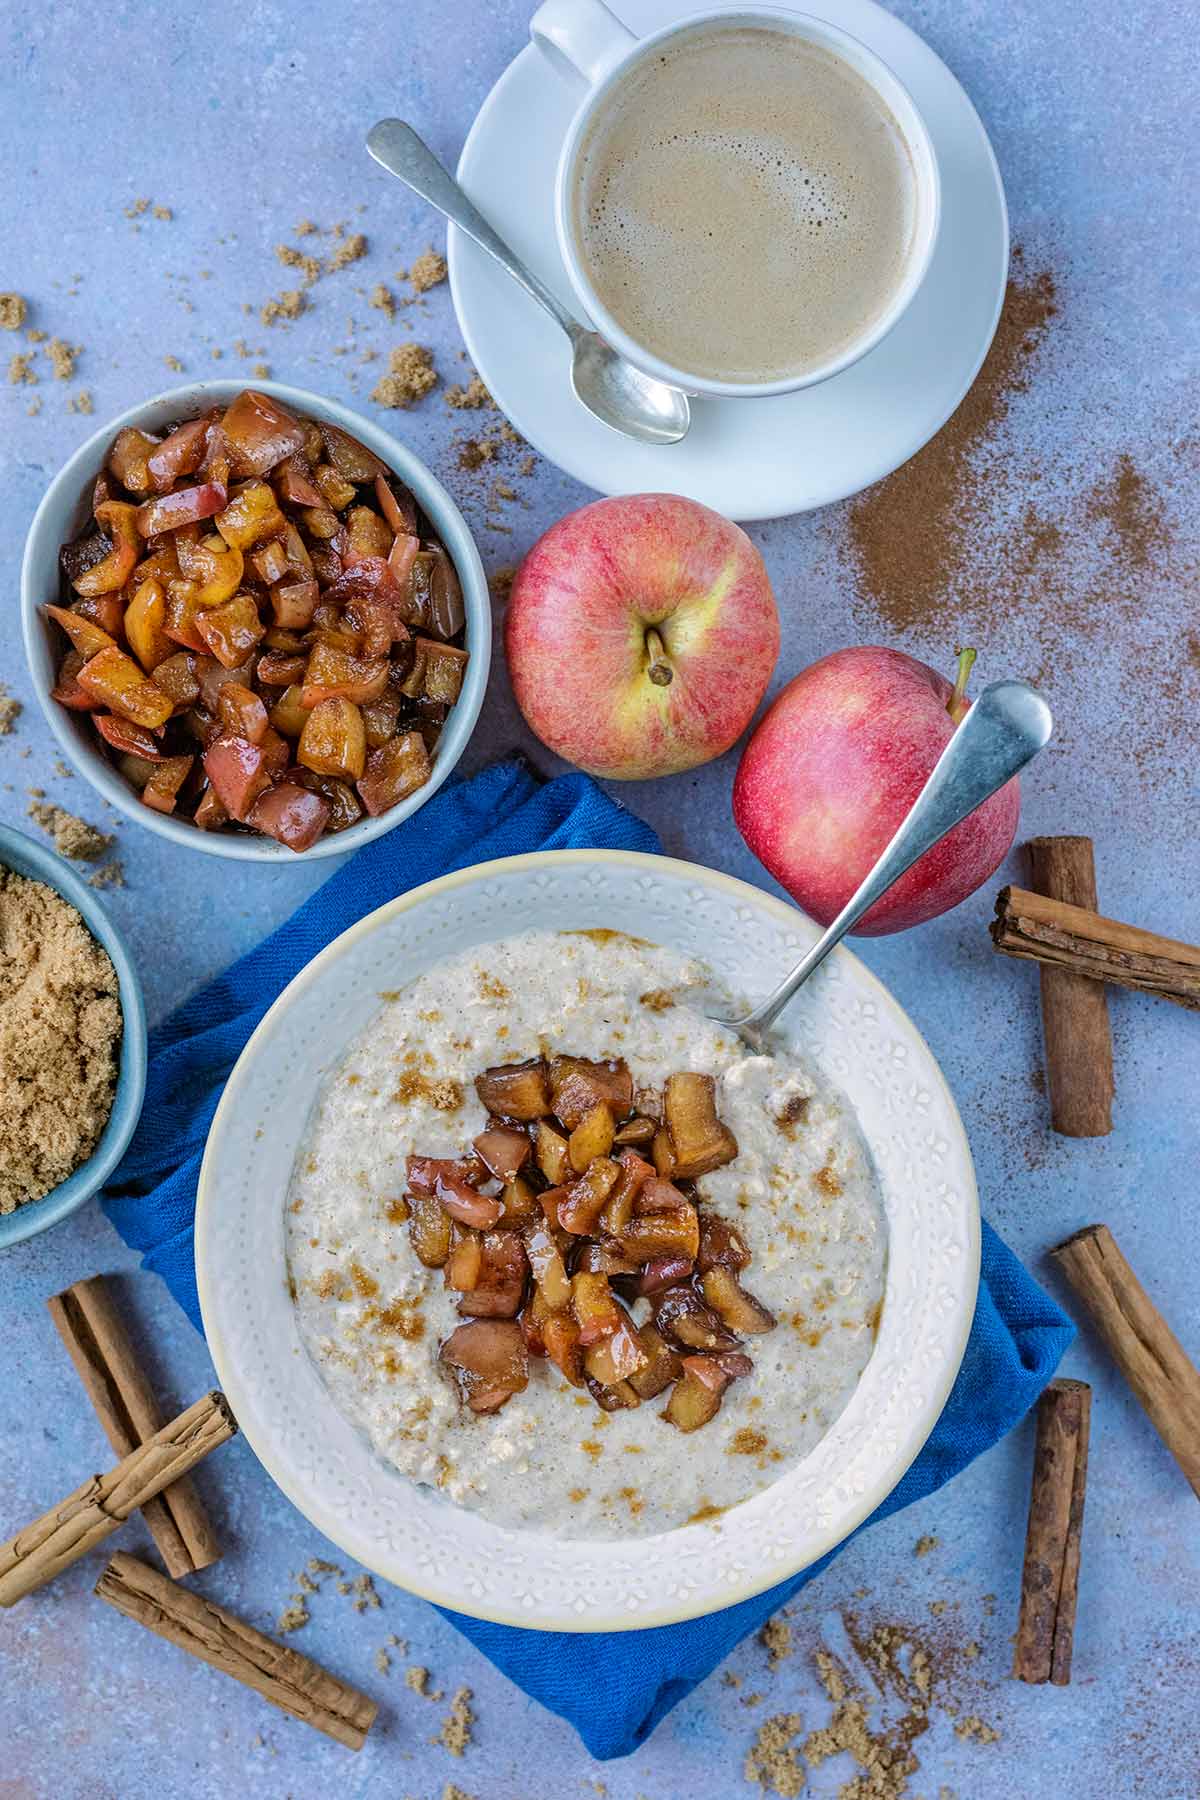 A bowl of porridge topped with cooked apples next to some apples and a cup of coffee.